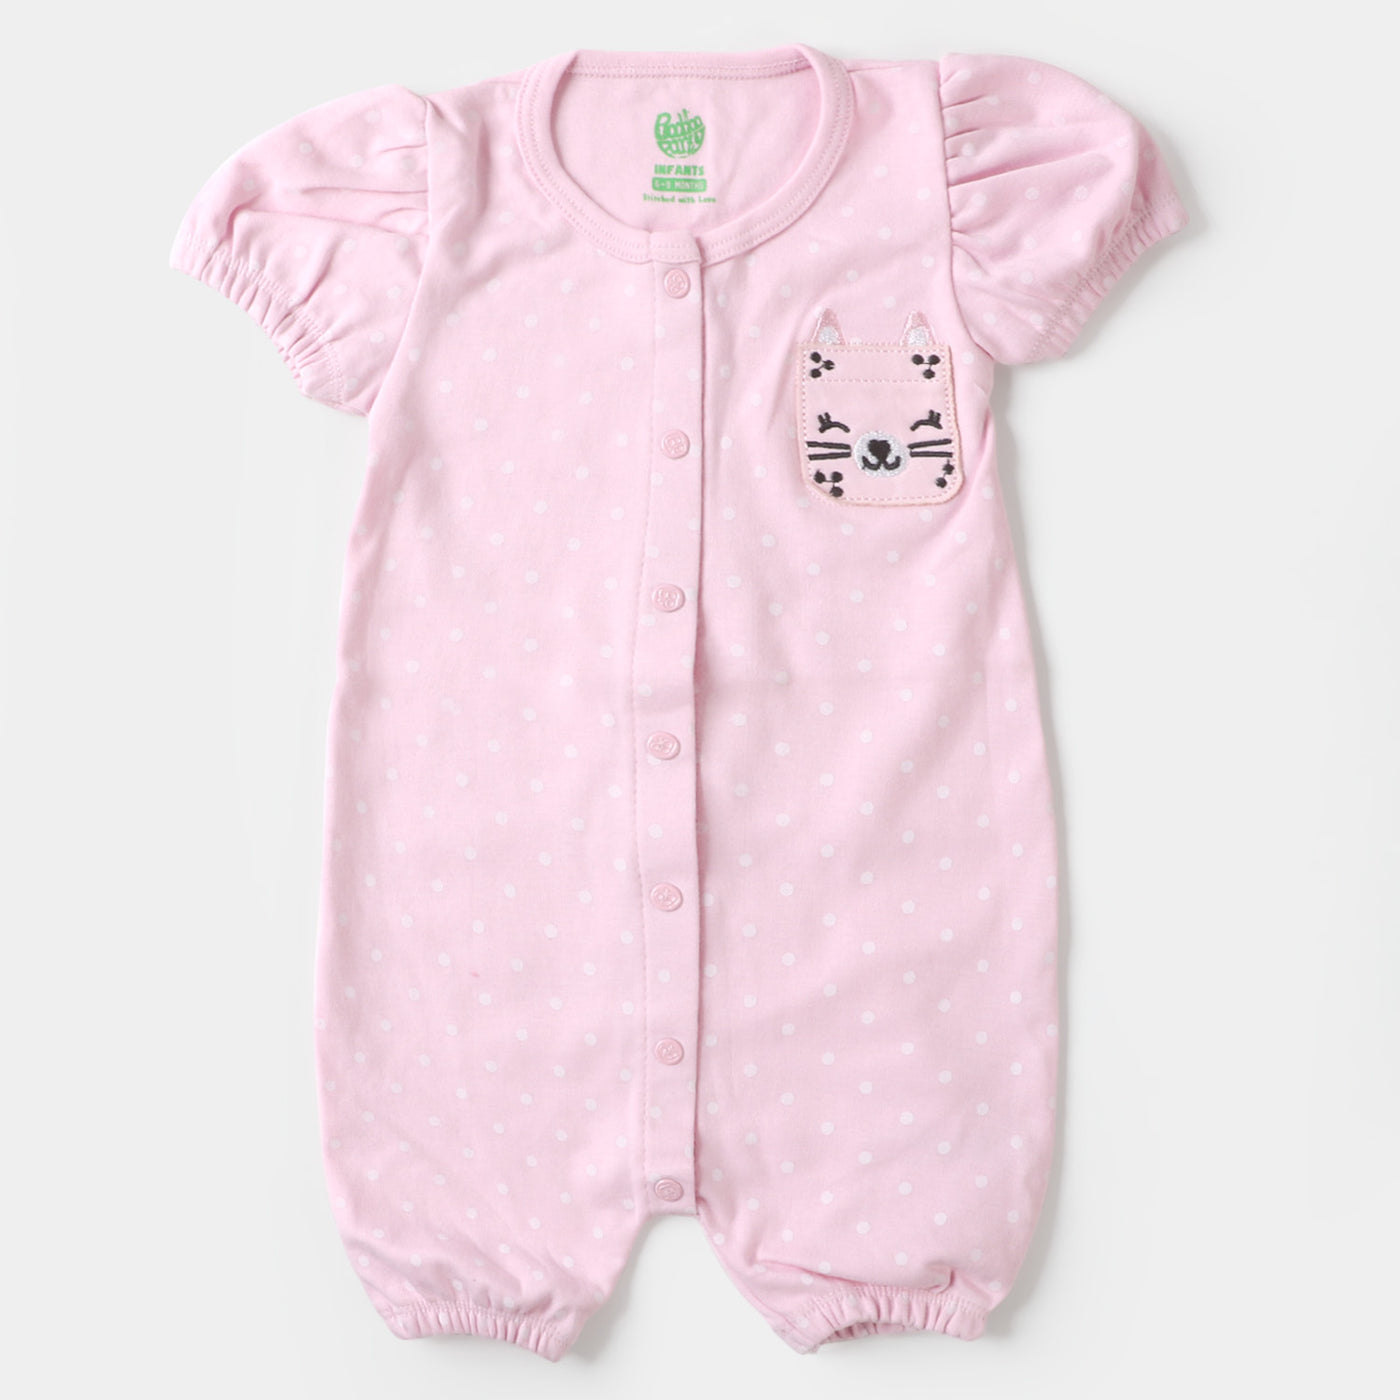 Infant Girls Knitted Romper Cat Pocket - Pink A Boo